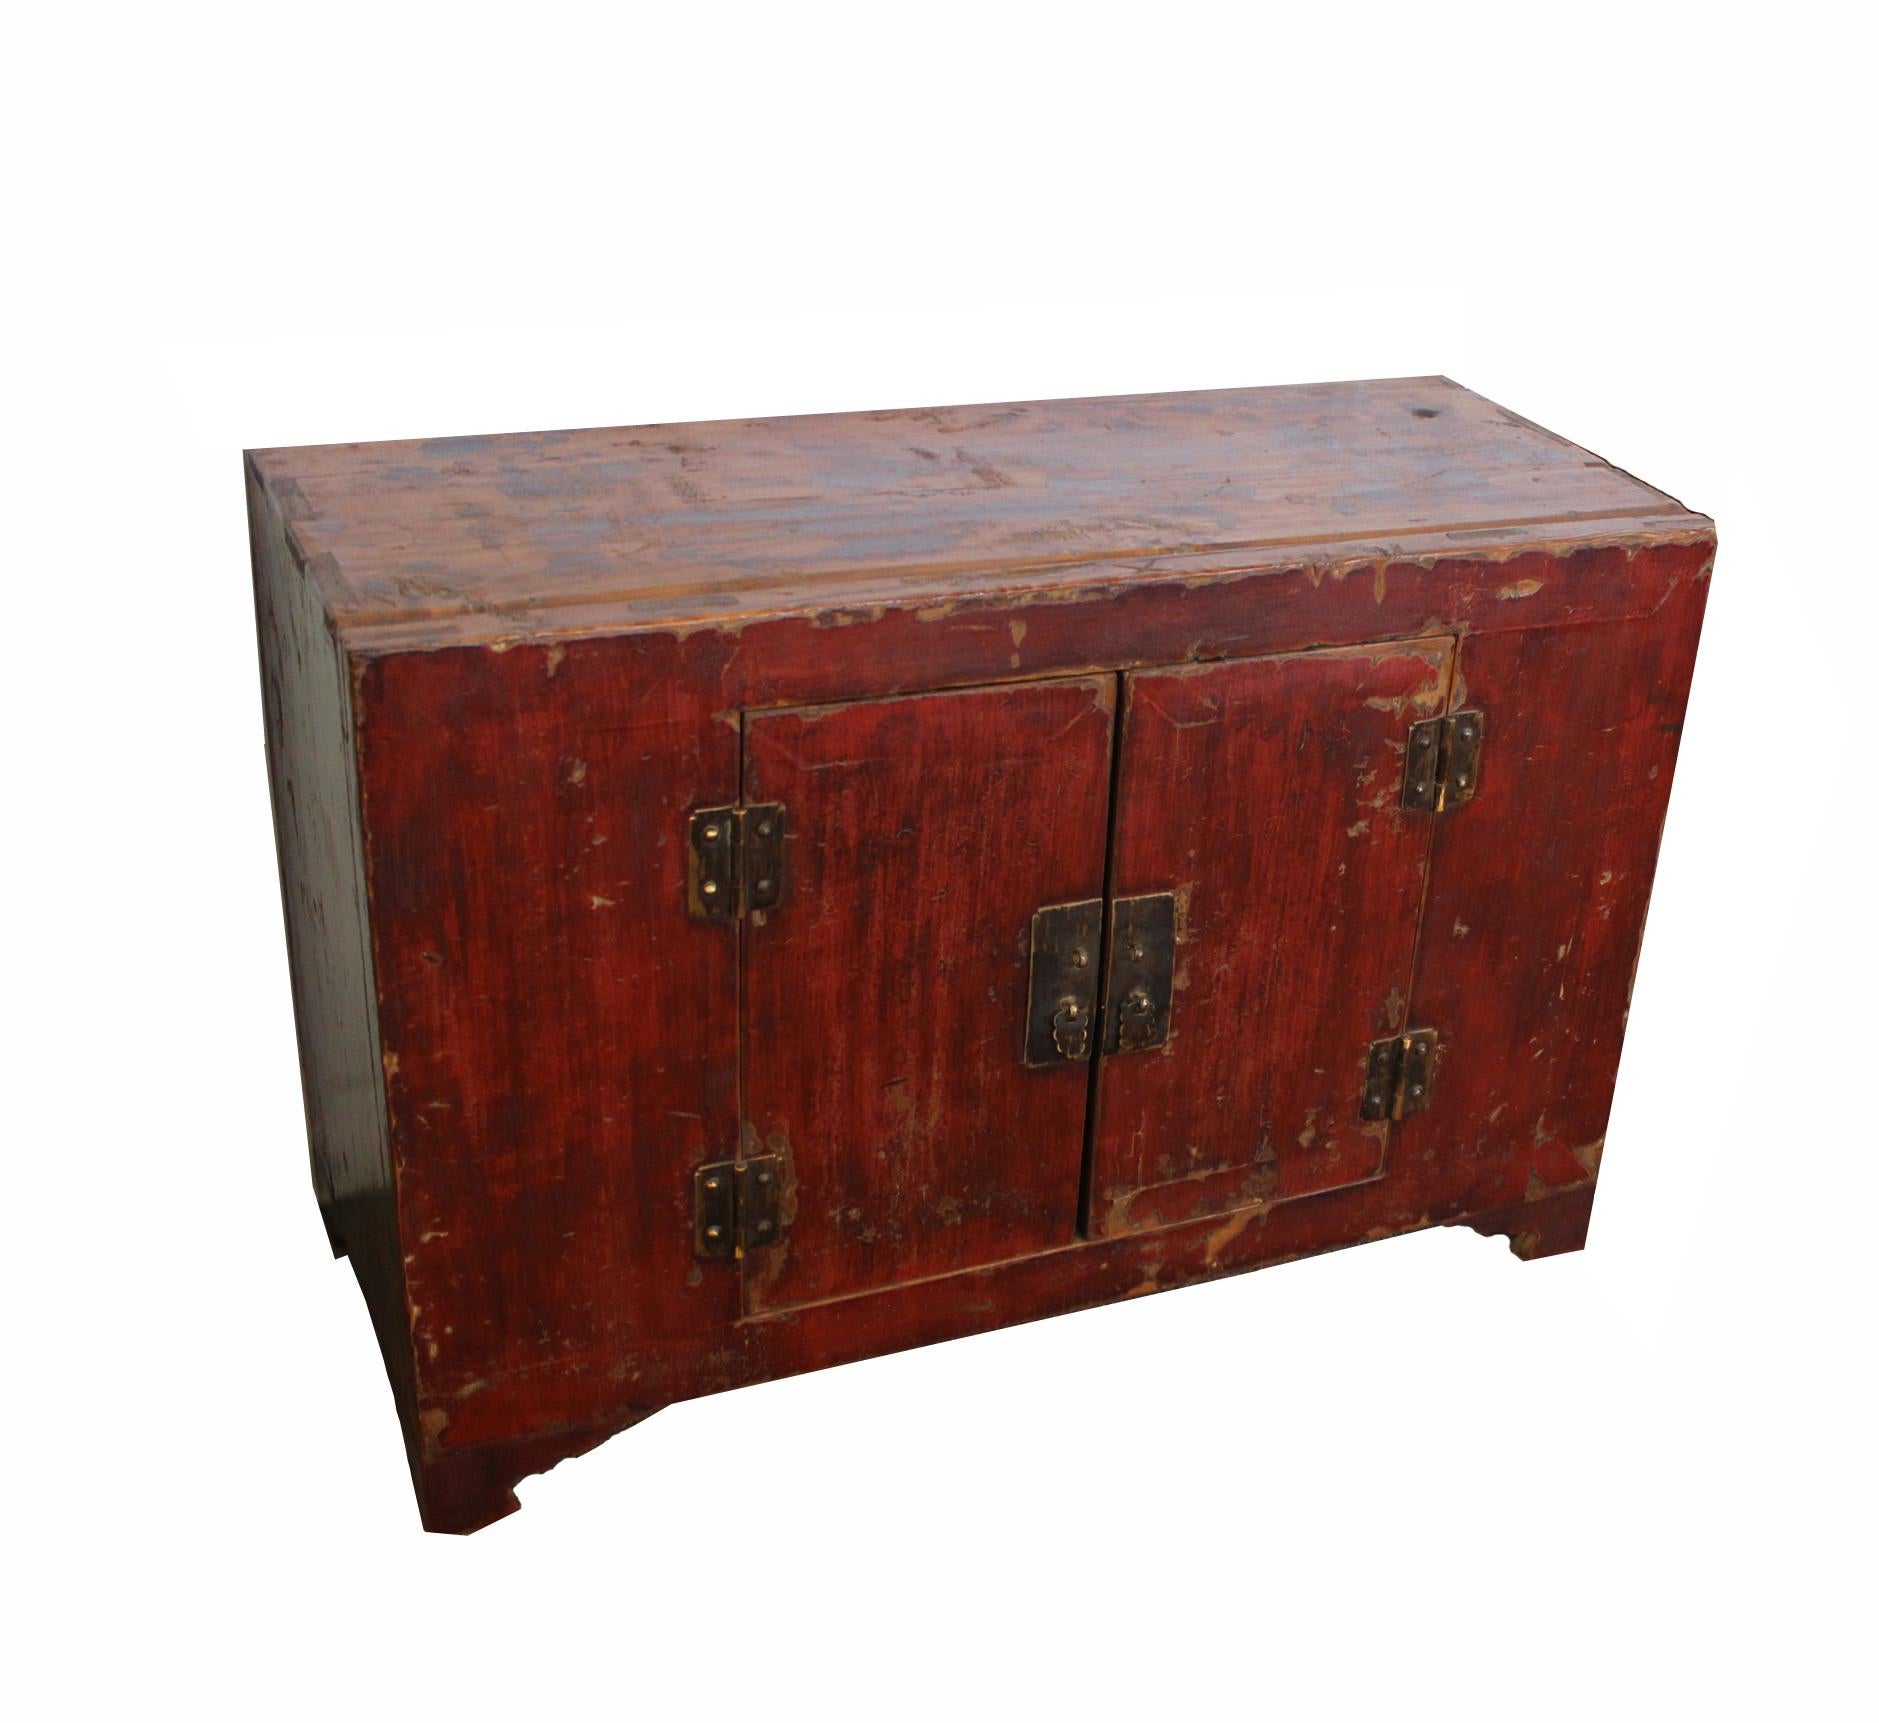 The paint on this antique Chinese cabinet is still original. The rich patina and crackling developed over a century add special characters and beauty to this cabinet. Double doors open to reveal a main compartment. Unique hand forged brass drop